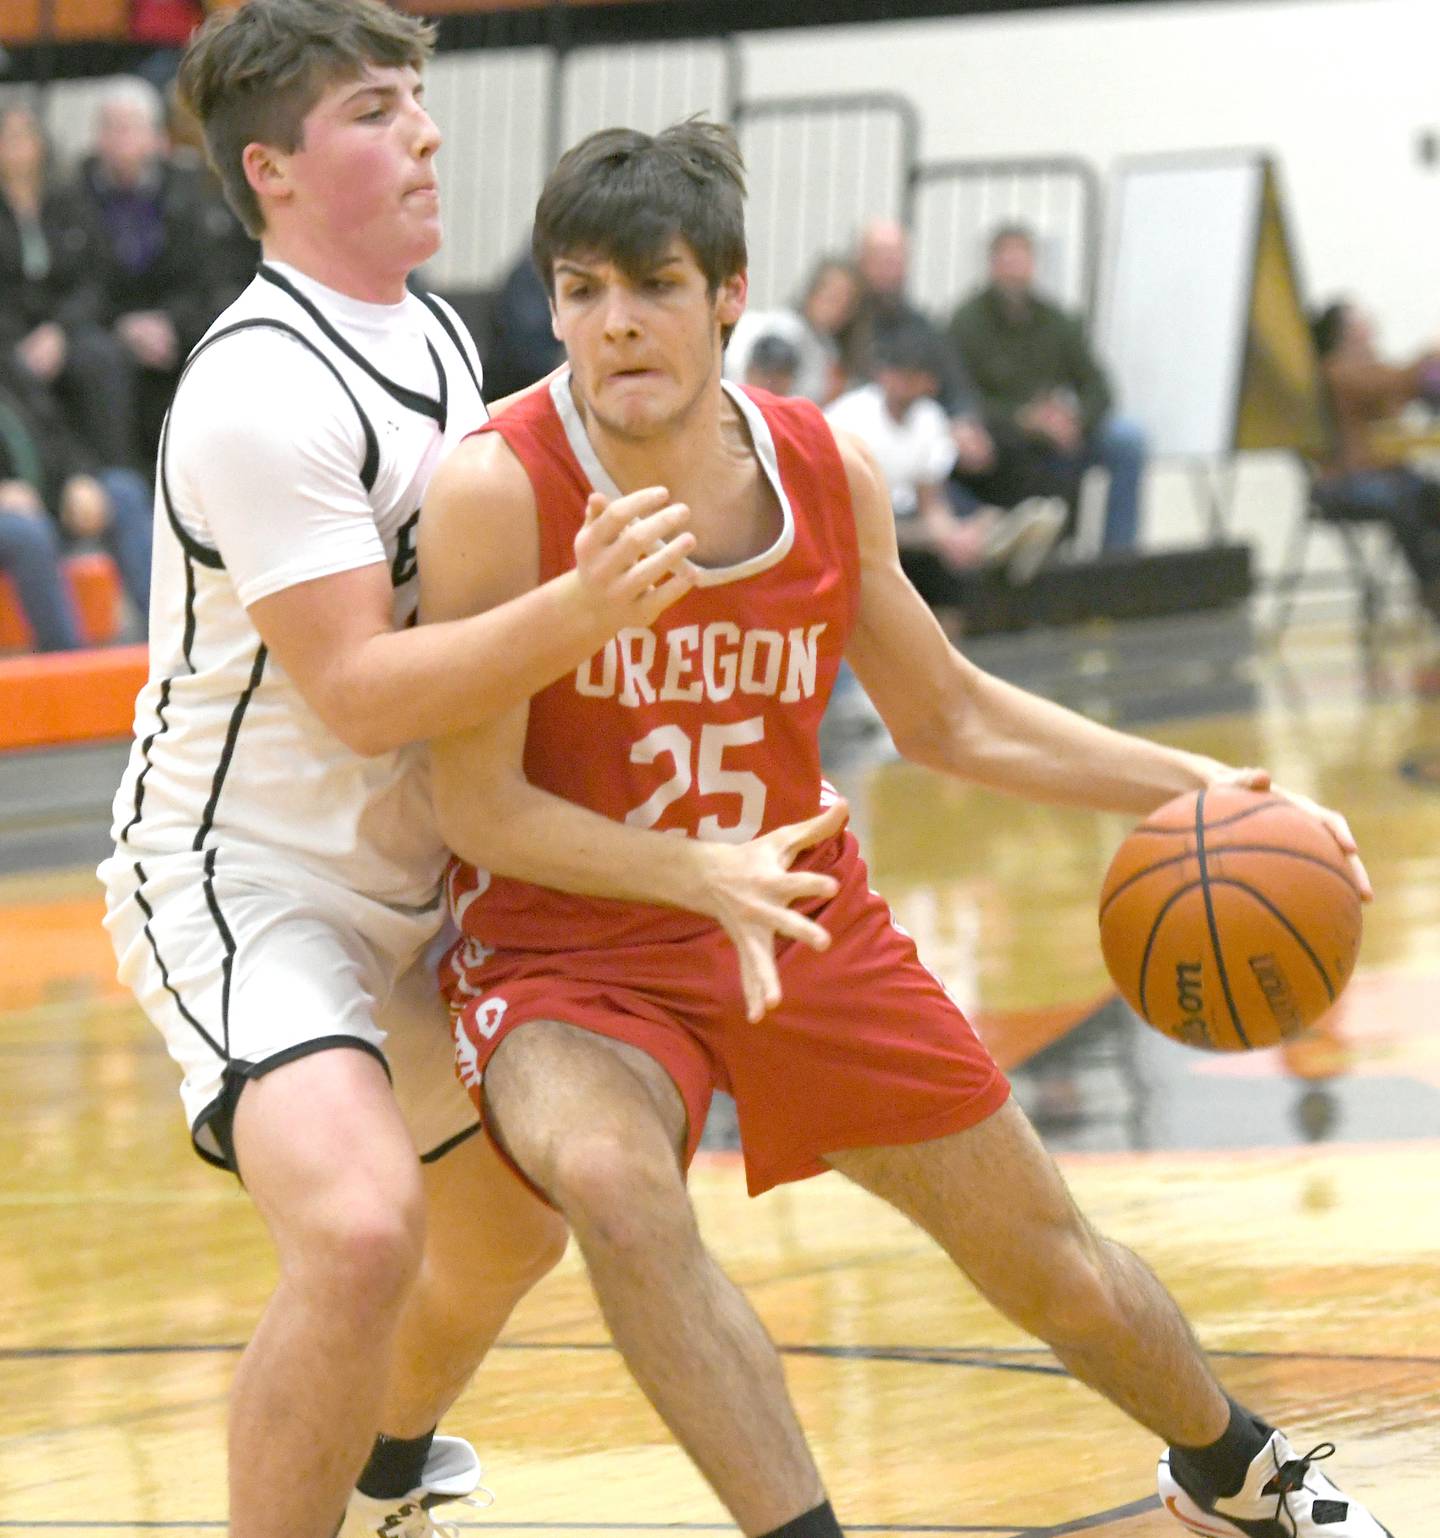 Oregon's Ryan Harkness (25) makes a move to the basket as Byron's Caden Considine defends during Friday, Jan. 20 Big Northern Conference game in Byron.